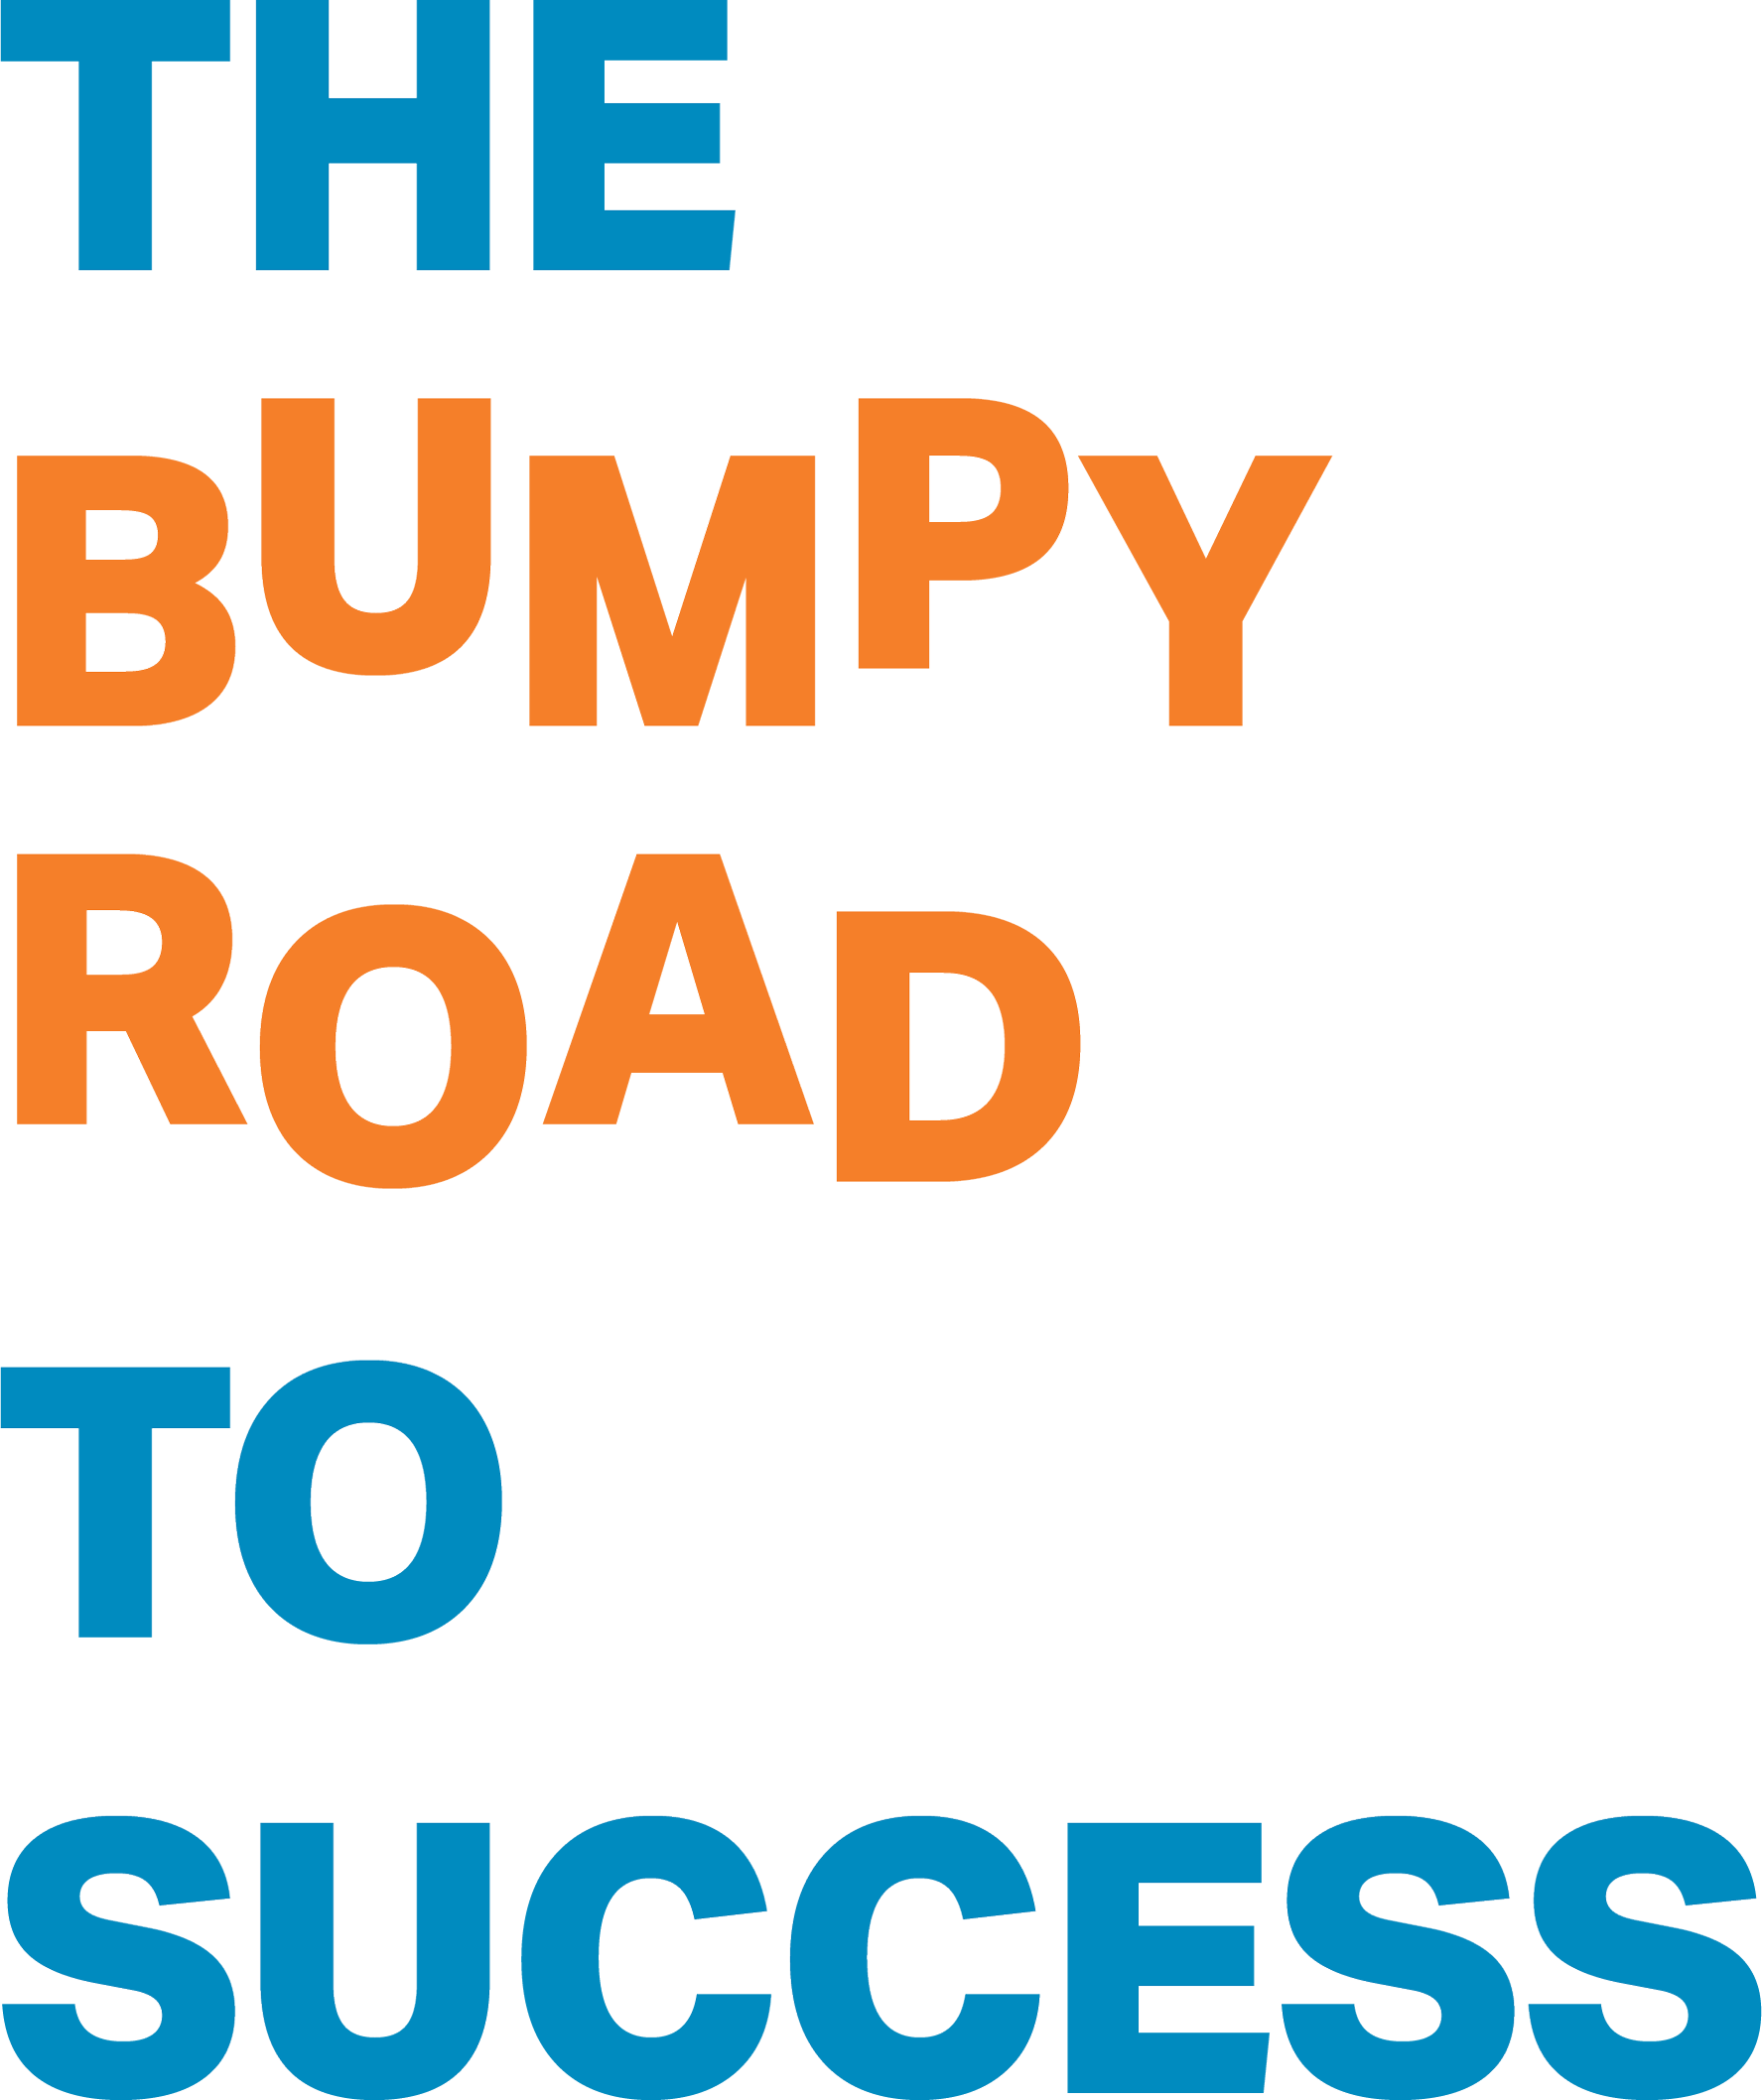 The Bumpy Road to Success typographic title